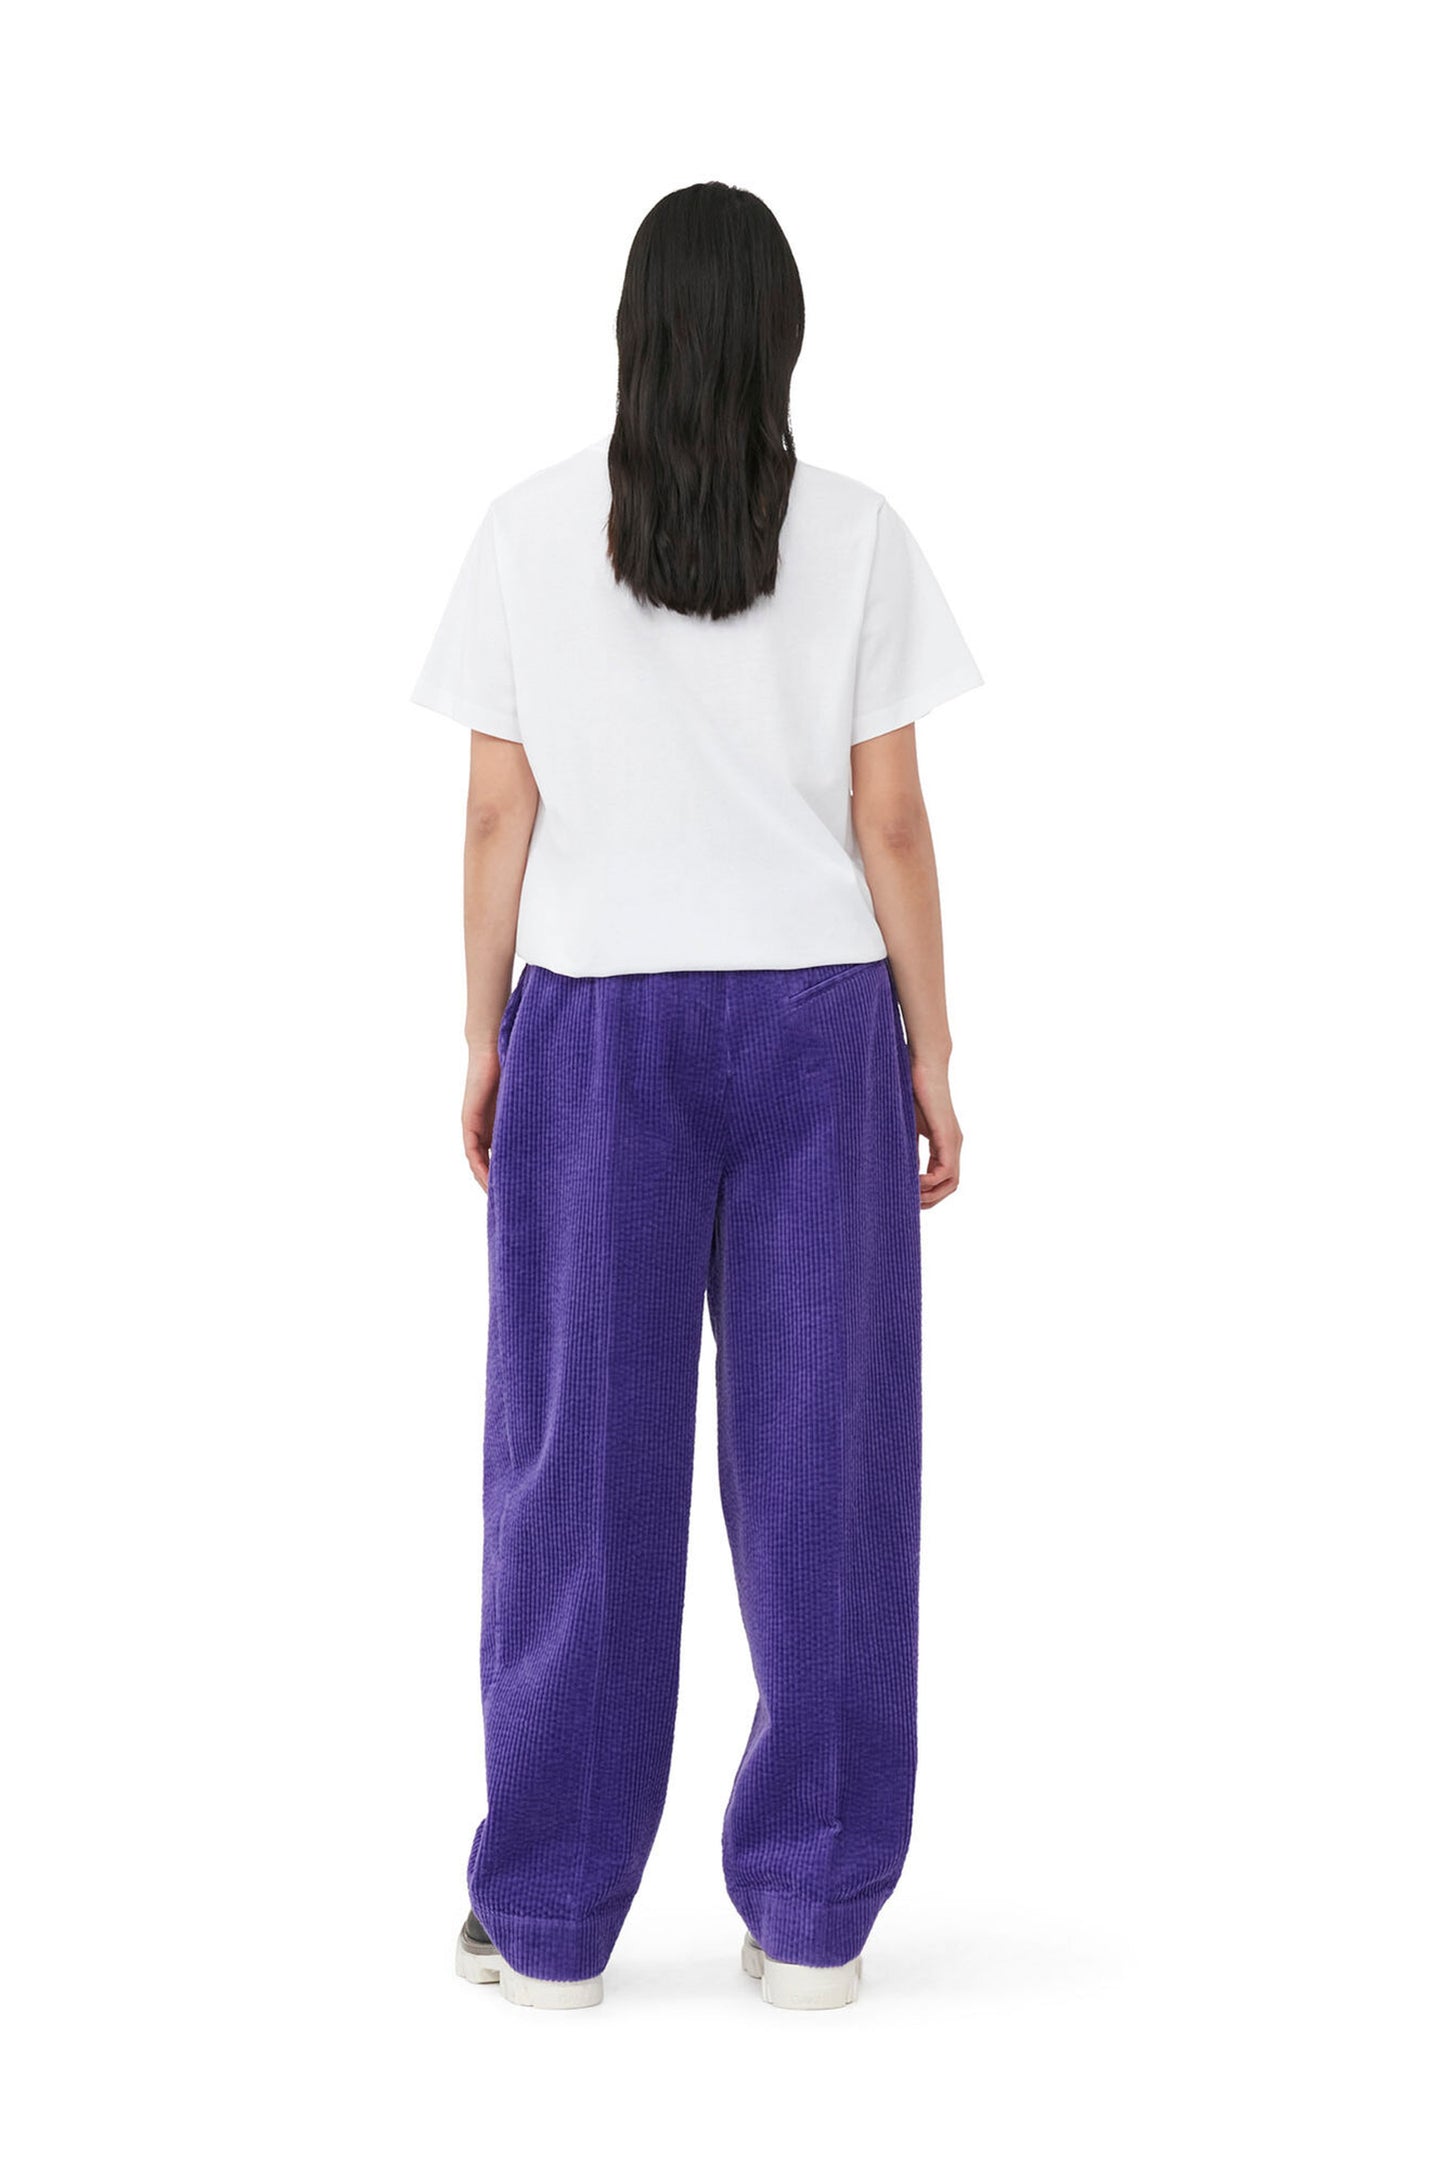 Corduroy Relaxed Pleated Pants